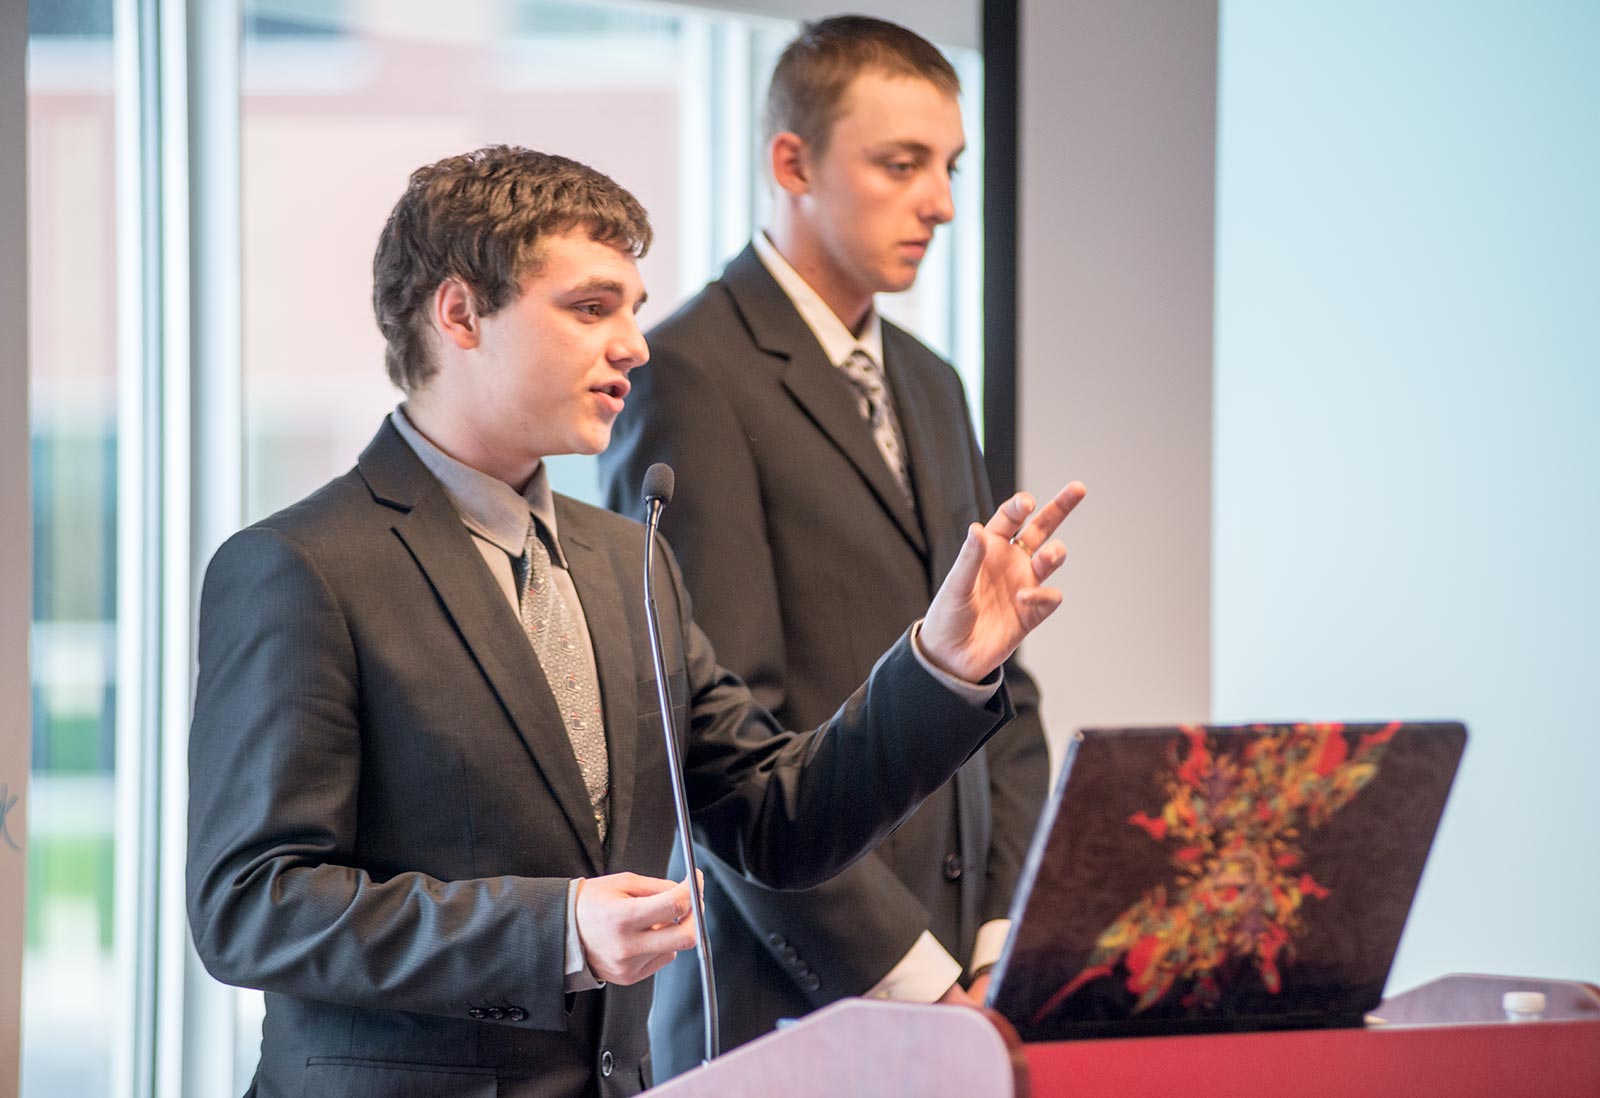 Cool ideas take flight at Student Superpower Challenge pitch competition